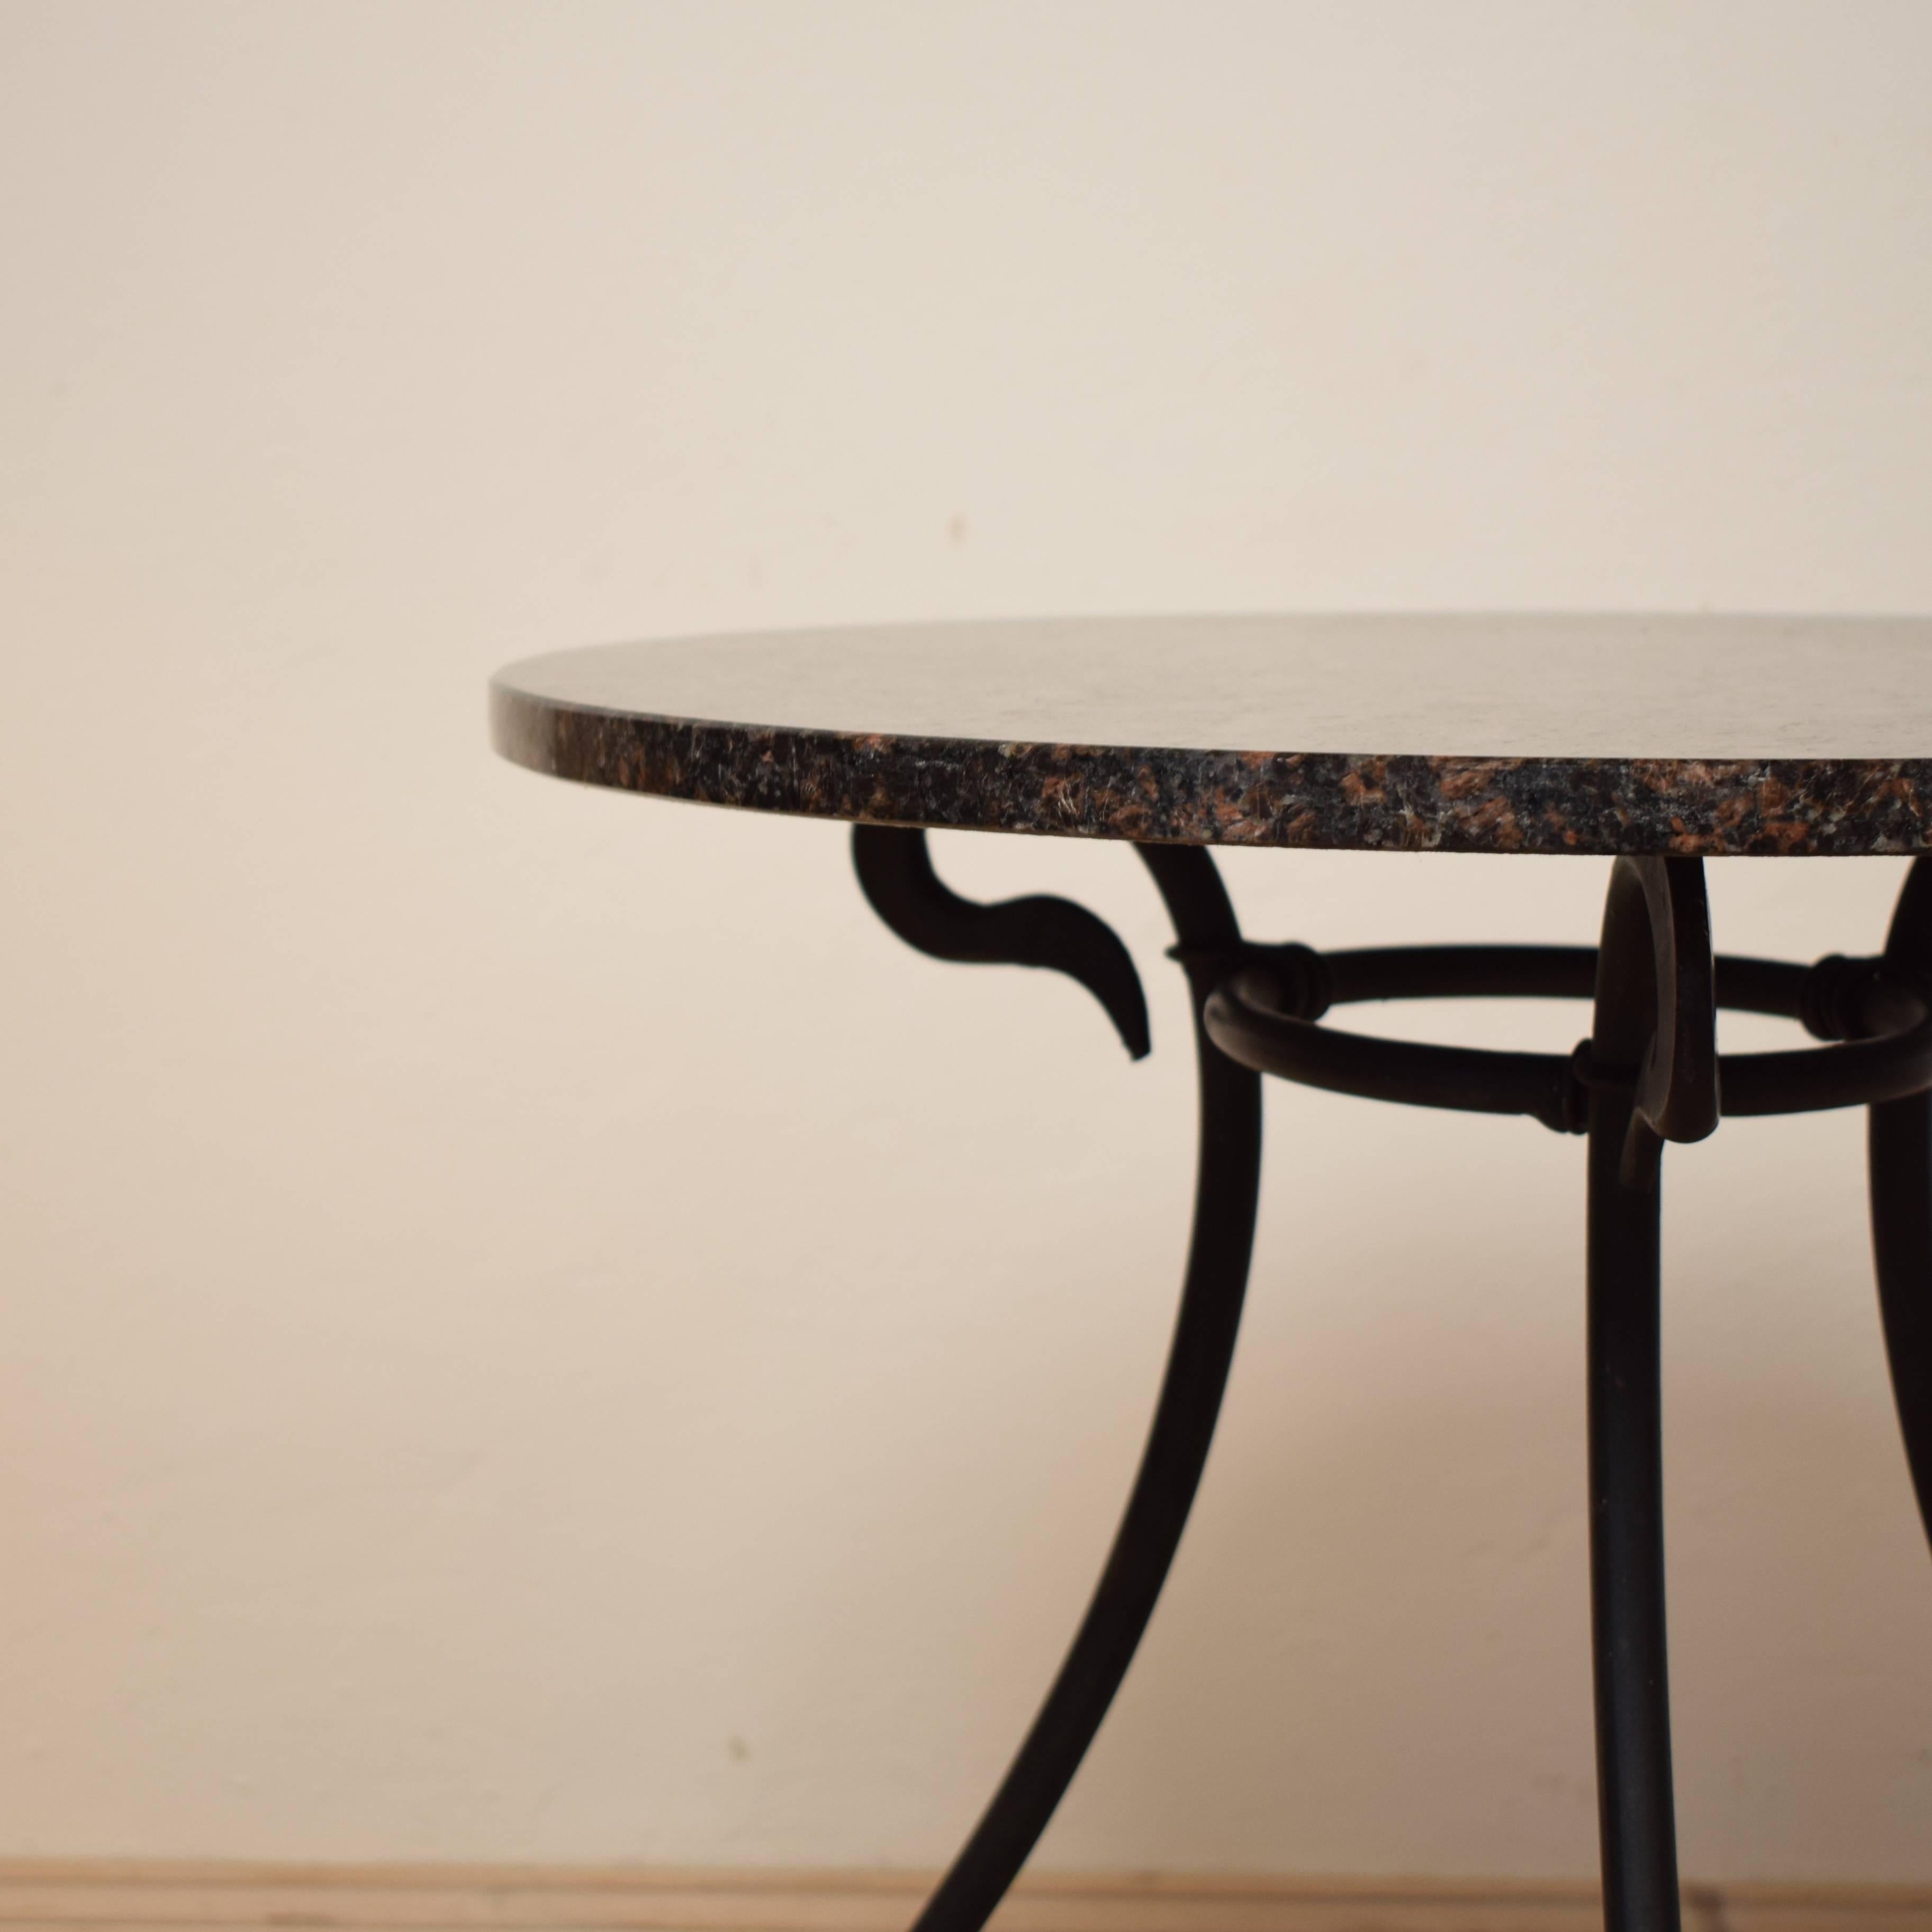 1950s Black Forged Iron Side Table with Granite Top (Deutsch)